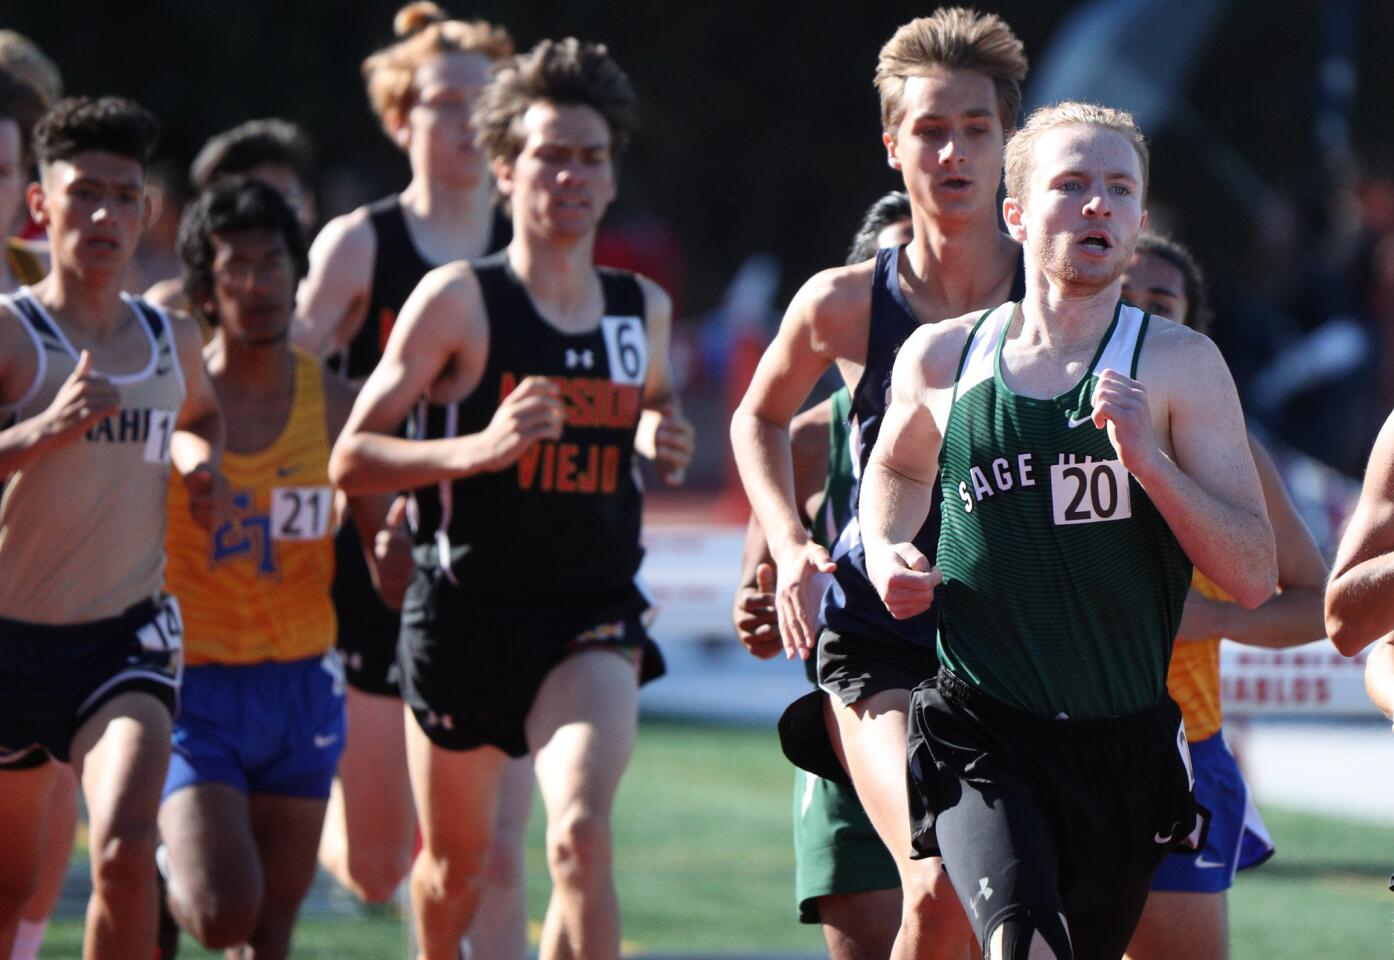 Photo Gallery: Orange County Championships of track and field